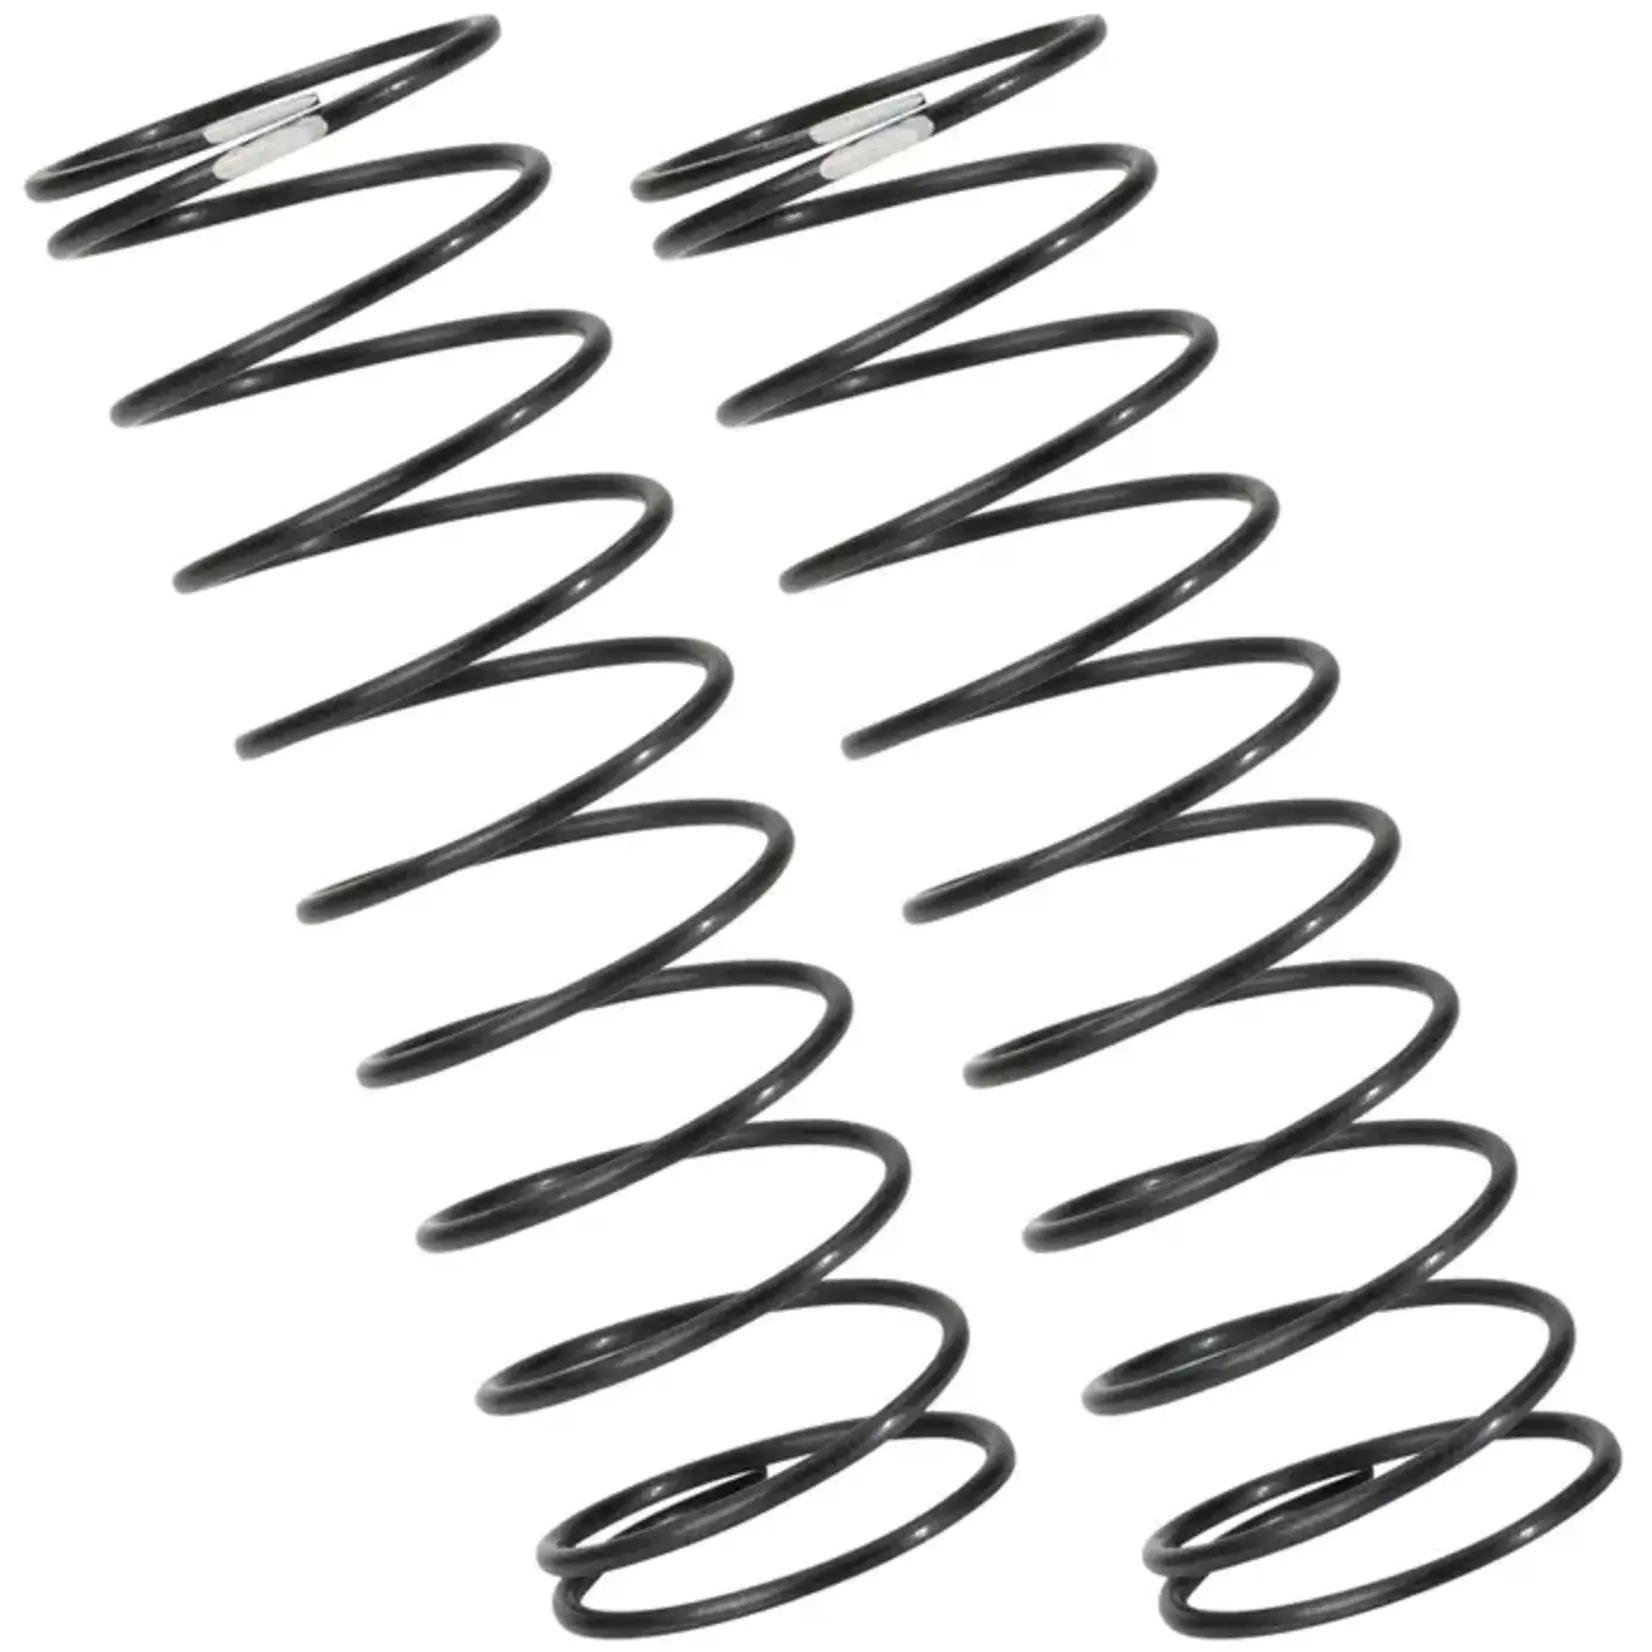 1UP 1UP10521 1Up Racing X-Gear 13mm Buggy Rear Springs - Extra Soft 10.50T White